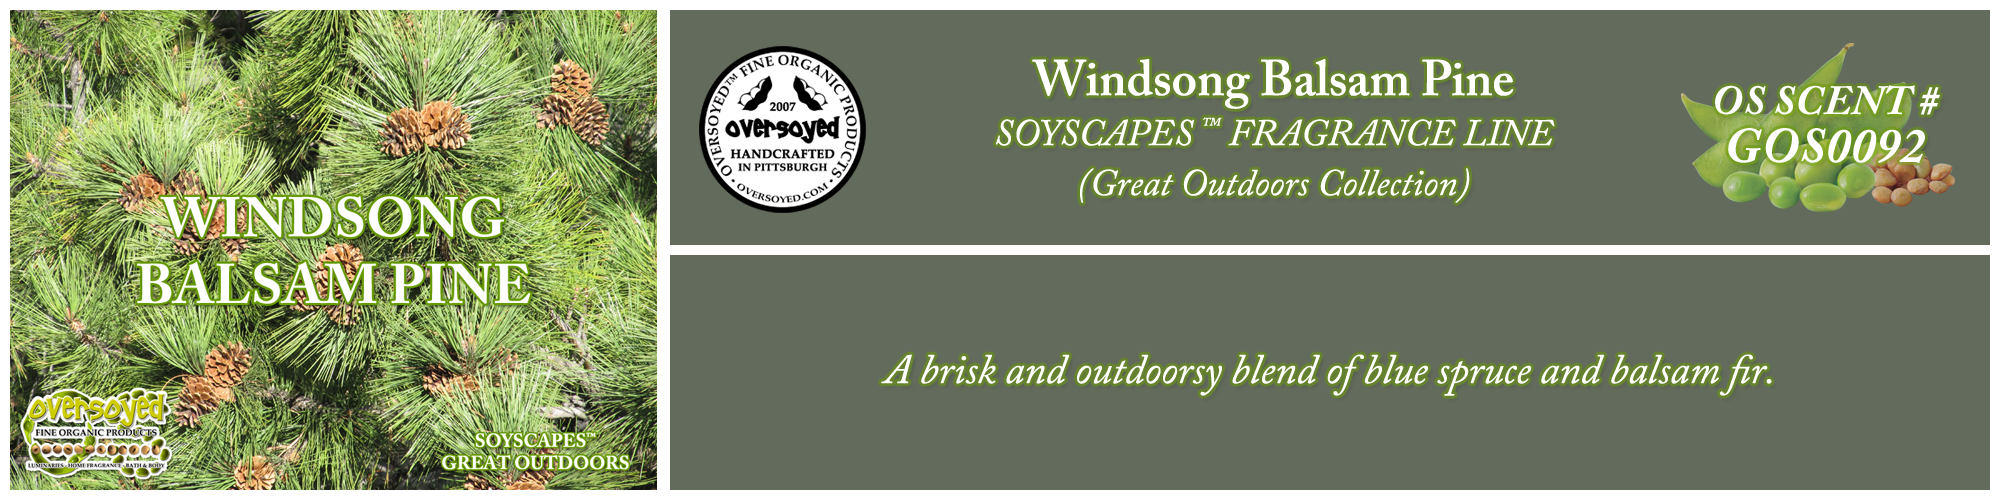 Windsong Balsam Pine Handcrafted Products Collection